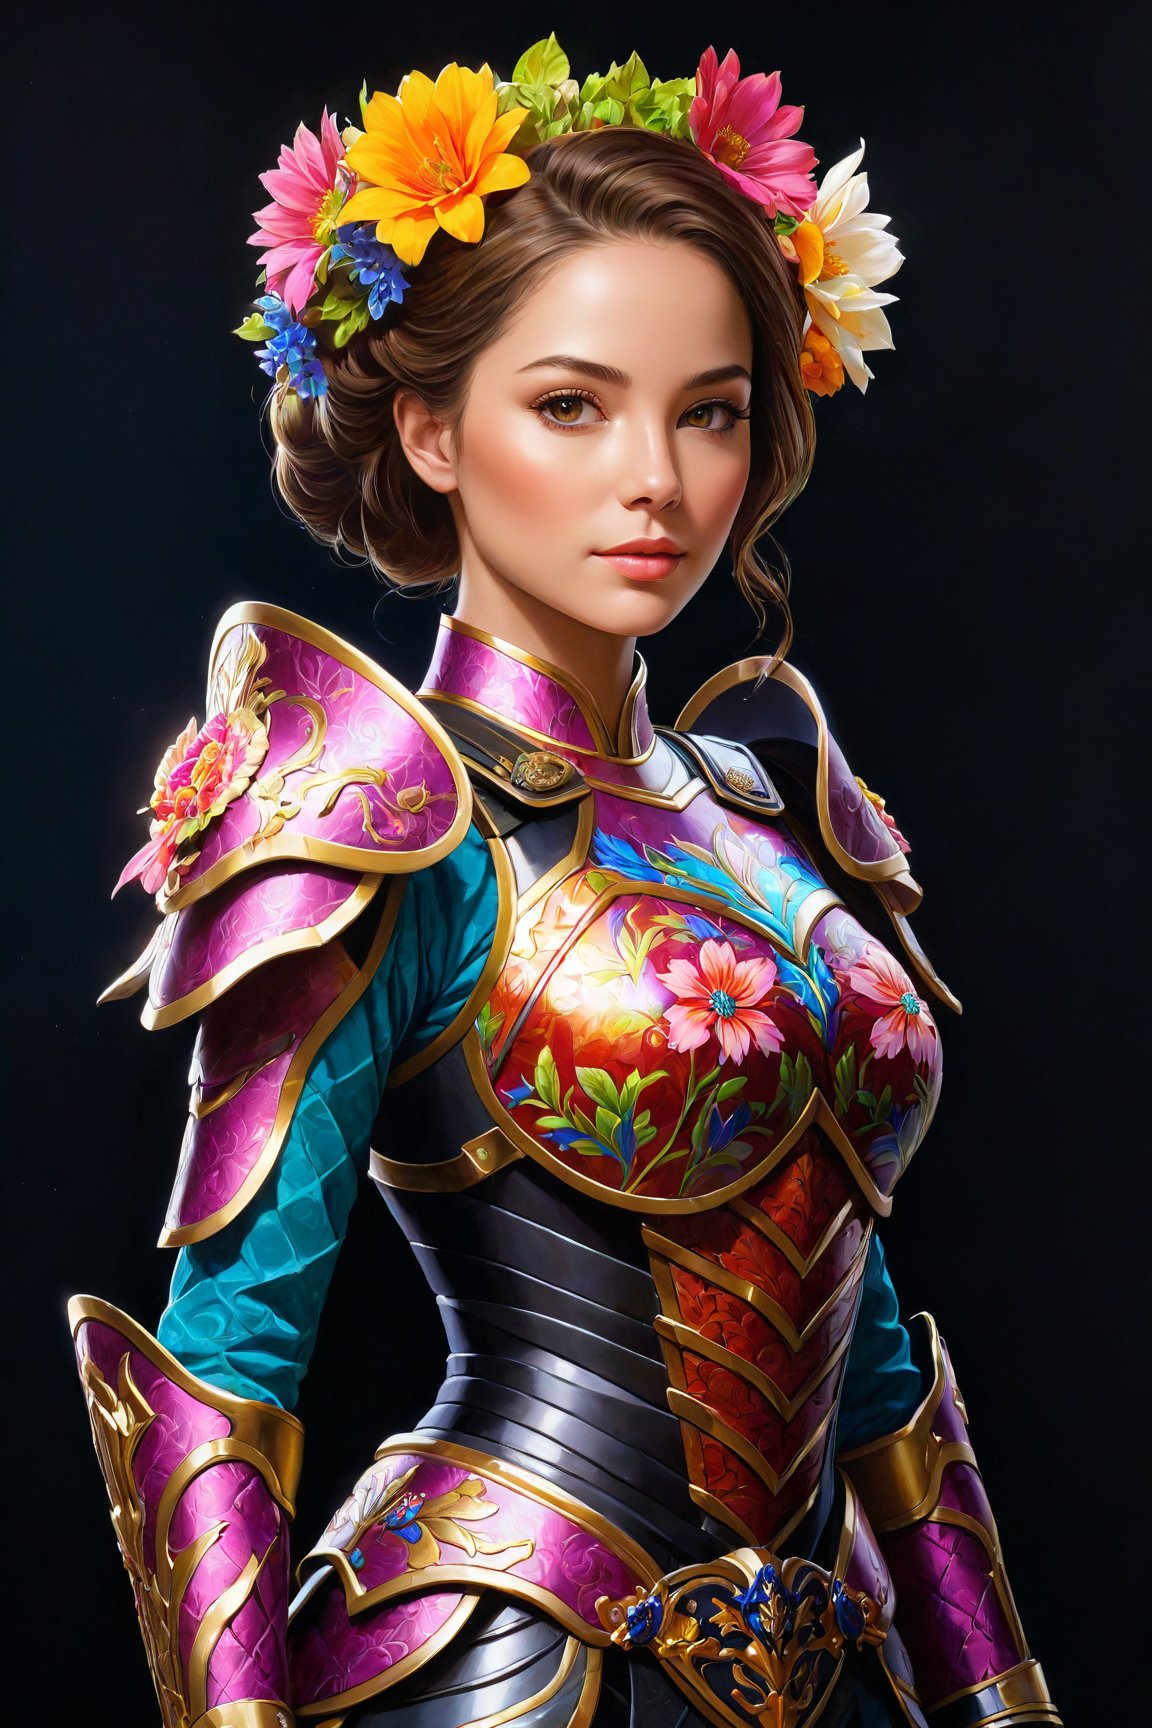 (best quality,  realistic,  high-resolution),  colorful portrait of a woman with flawless anatomy. She is wearing a stunning flower dress that compliments her vibrant personality. Her skin is extremely detailed and realistic,  with a natural and lifelike texture. The background is dark,  which creates a striking contrast to the colorful flowers adorning her armor. The flowers on her armor represent her strength and beauty. The lighting accentuates the contours of her face,  adding depth and dimension to the portrait. The overall composition is masterfully done,  showcasing the intricate details and achieving a high level of realism,  Realistic